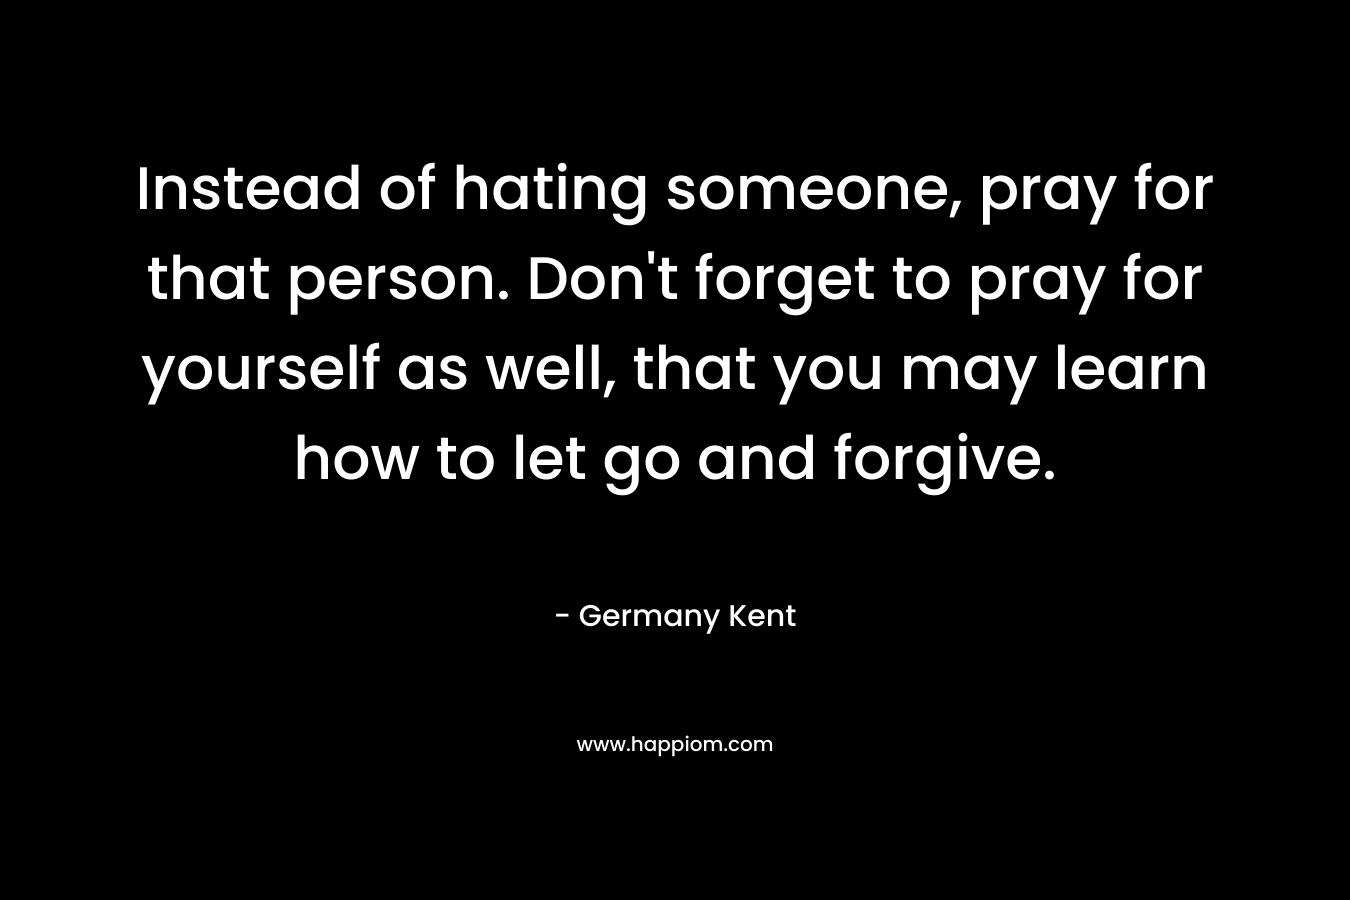 Instead of hating someone, pray for that person. Don't forget to pray for yourself as well, that you may learn how to let go and forgive.